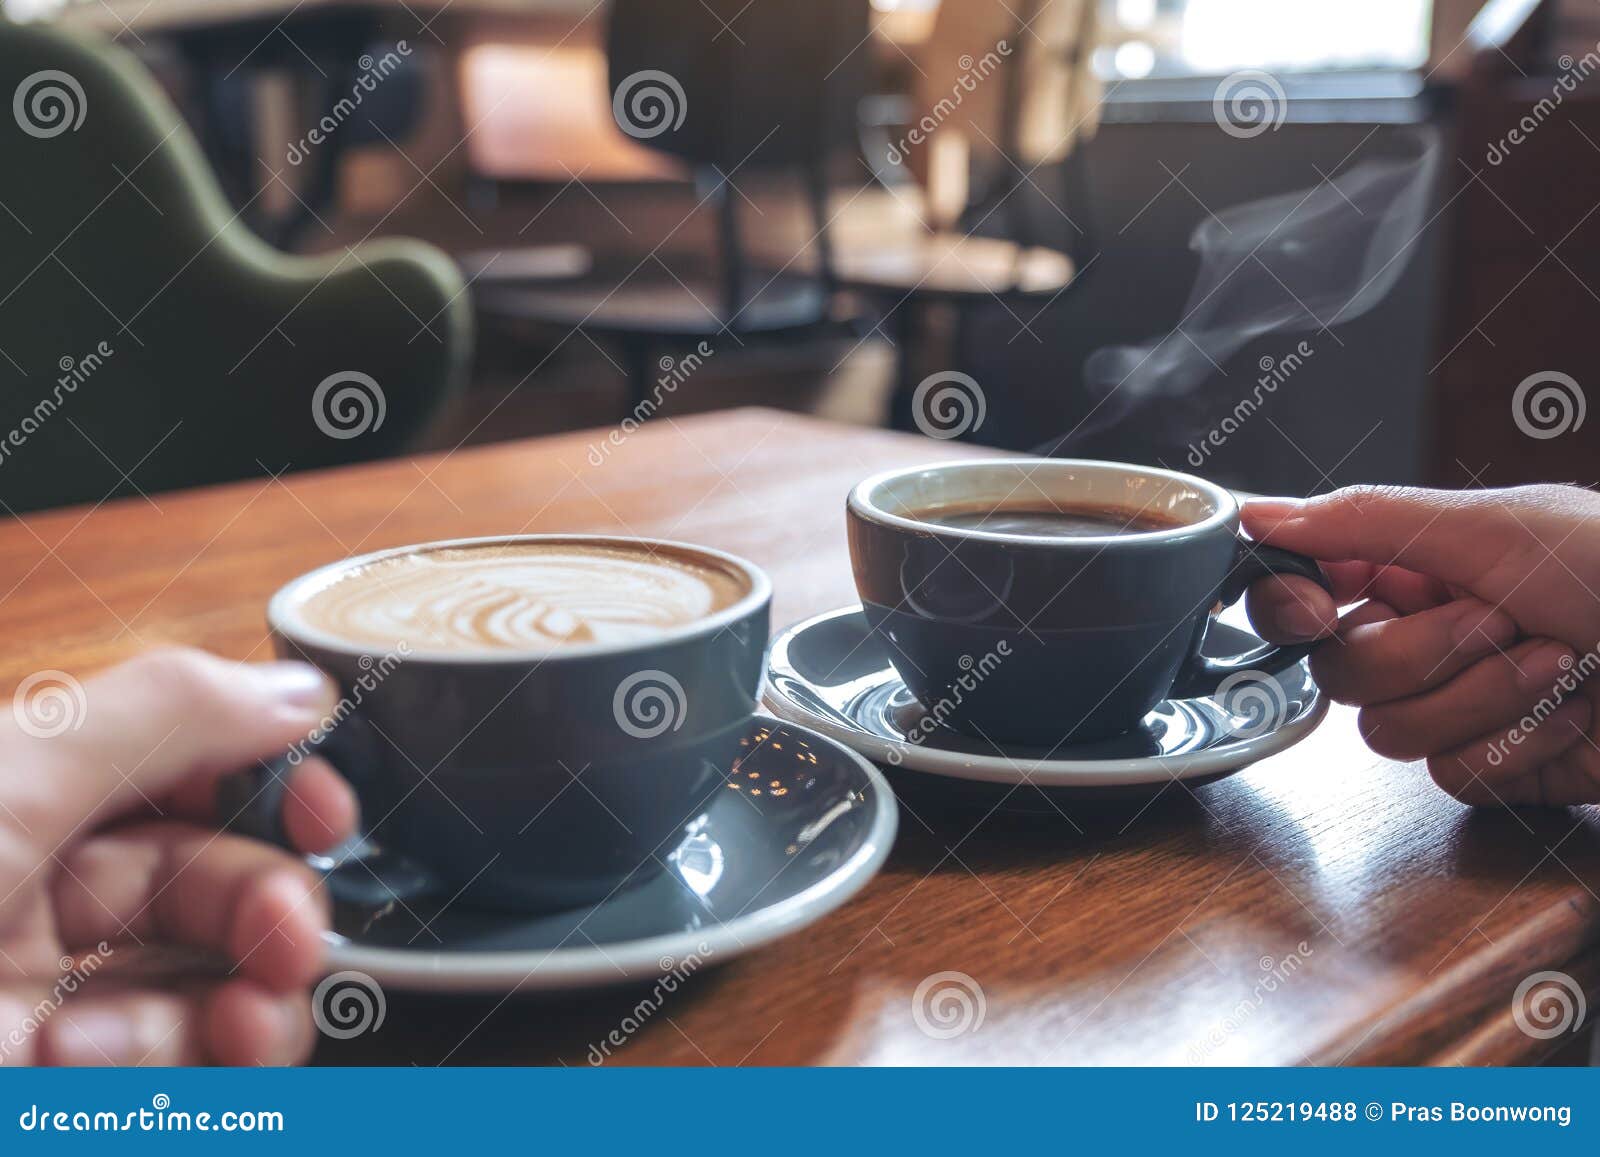 two people`s hands holding coffee and hot chocolate cups on wooden table in cafe